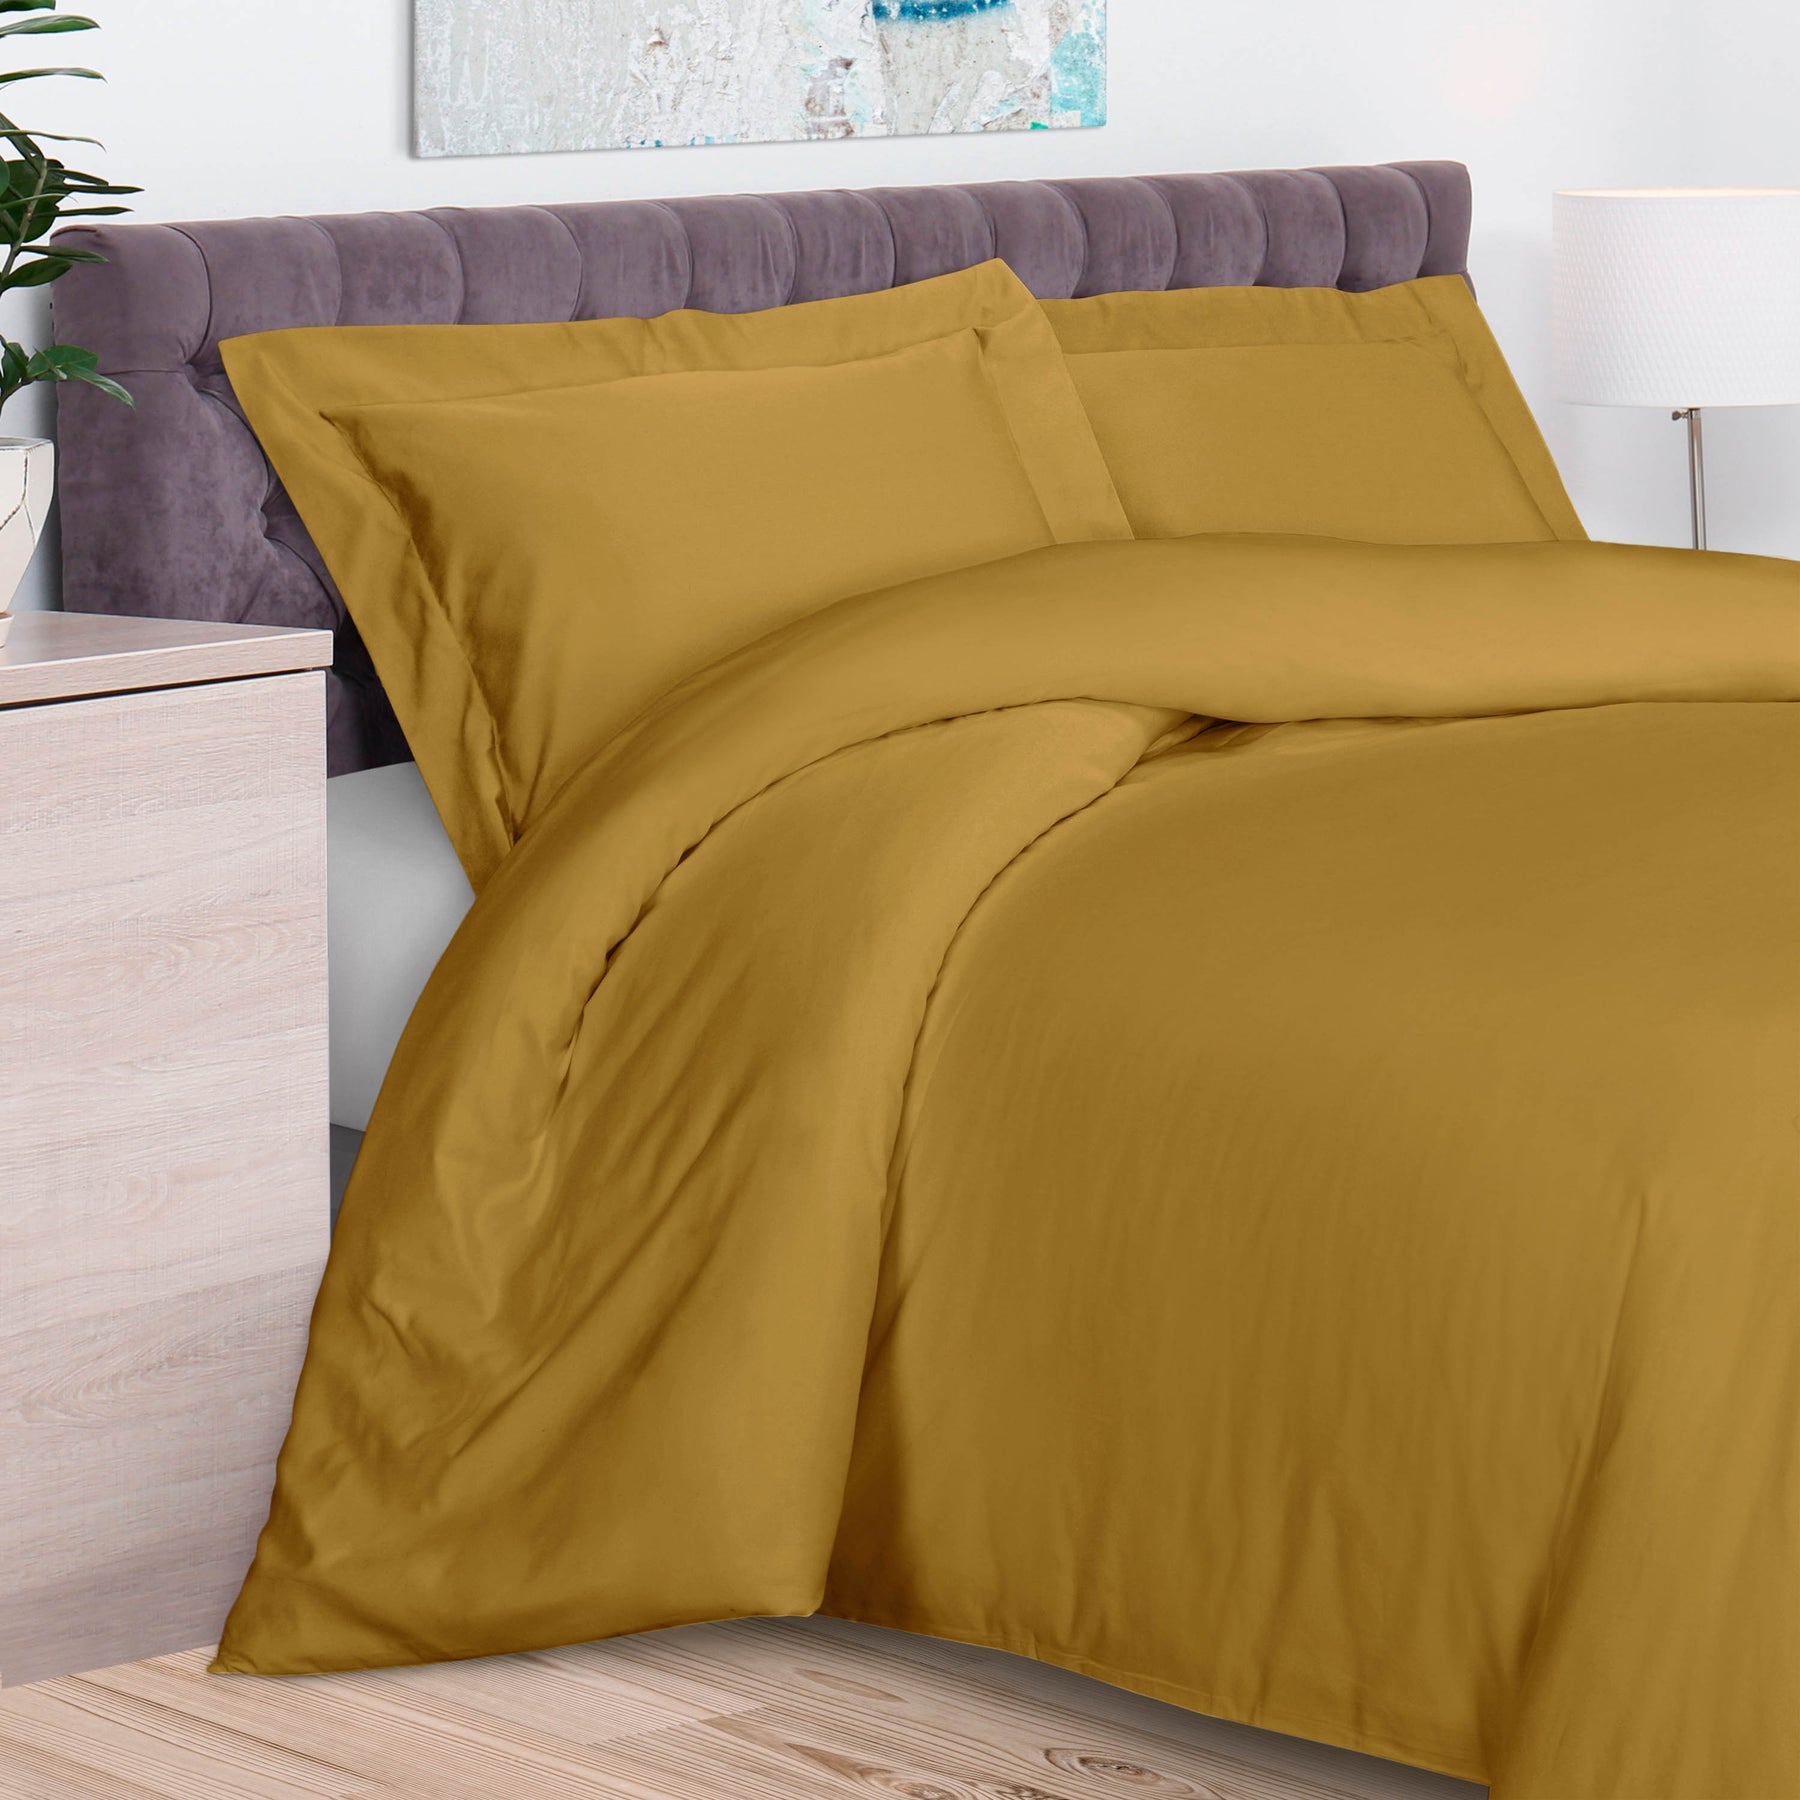 100% Rayon From Bamboo 300 Thread Count Solid Duvet Cover Set - Gold